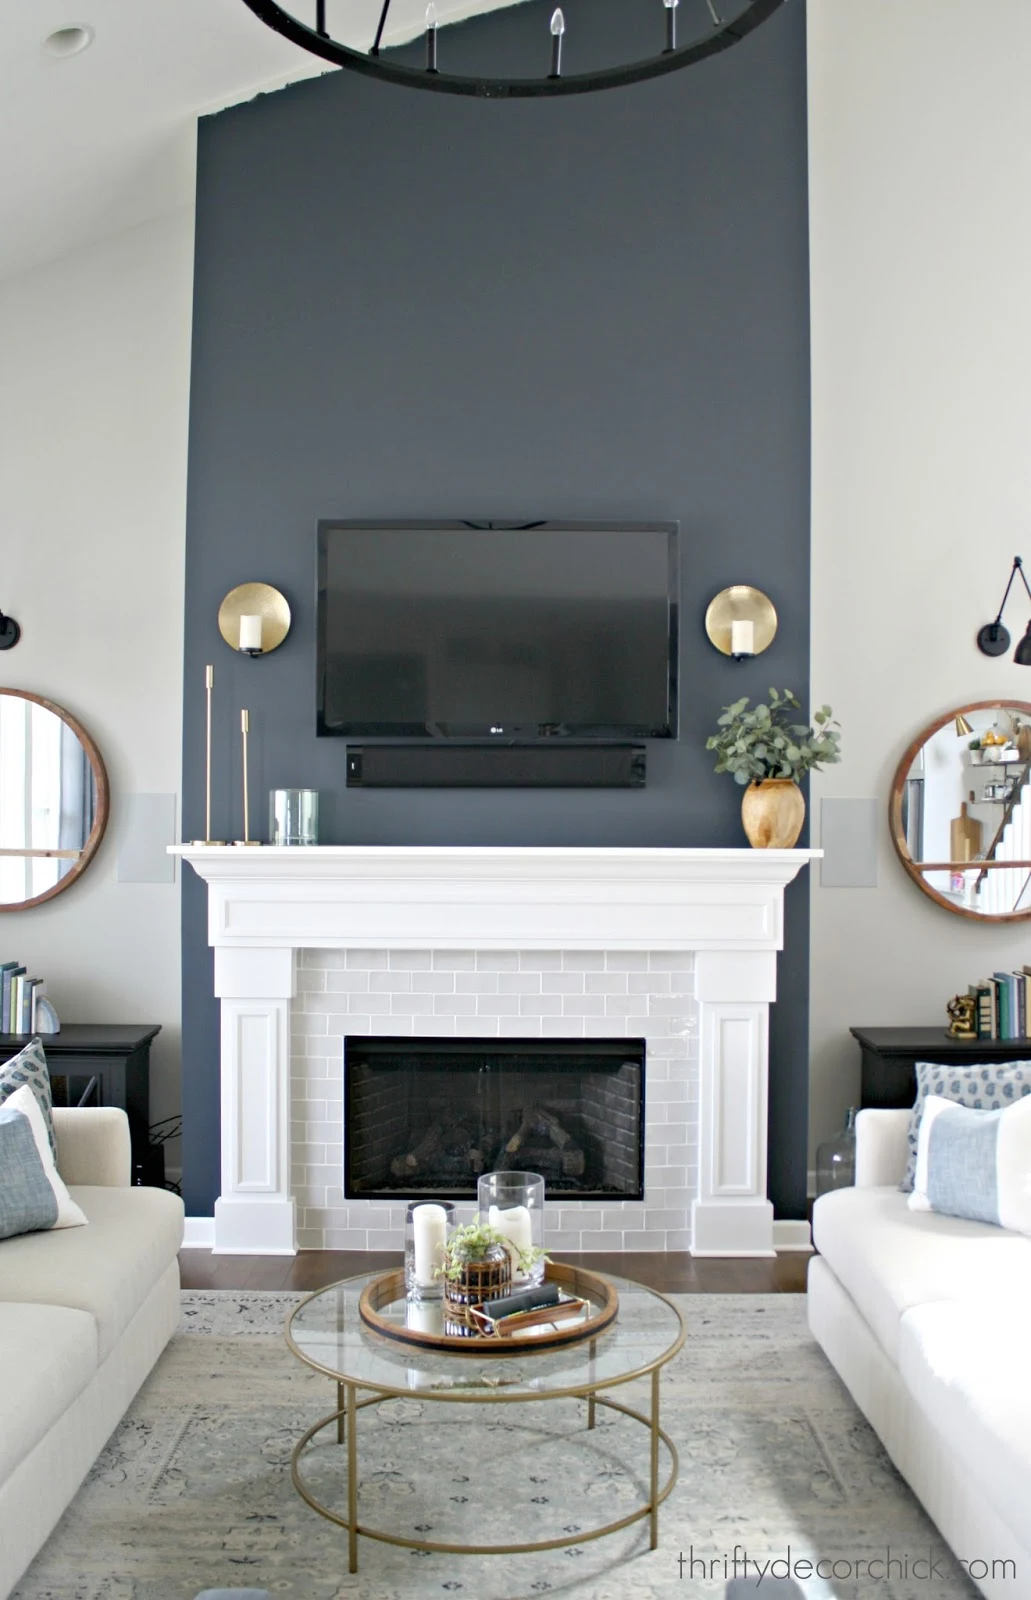 Painting a fireplace wall a dark contrast color